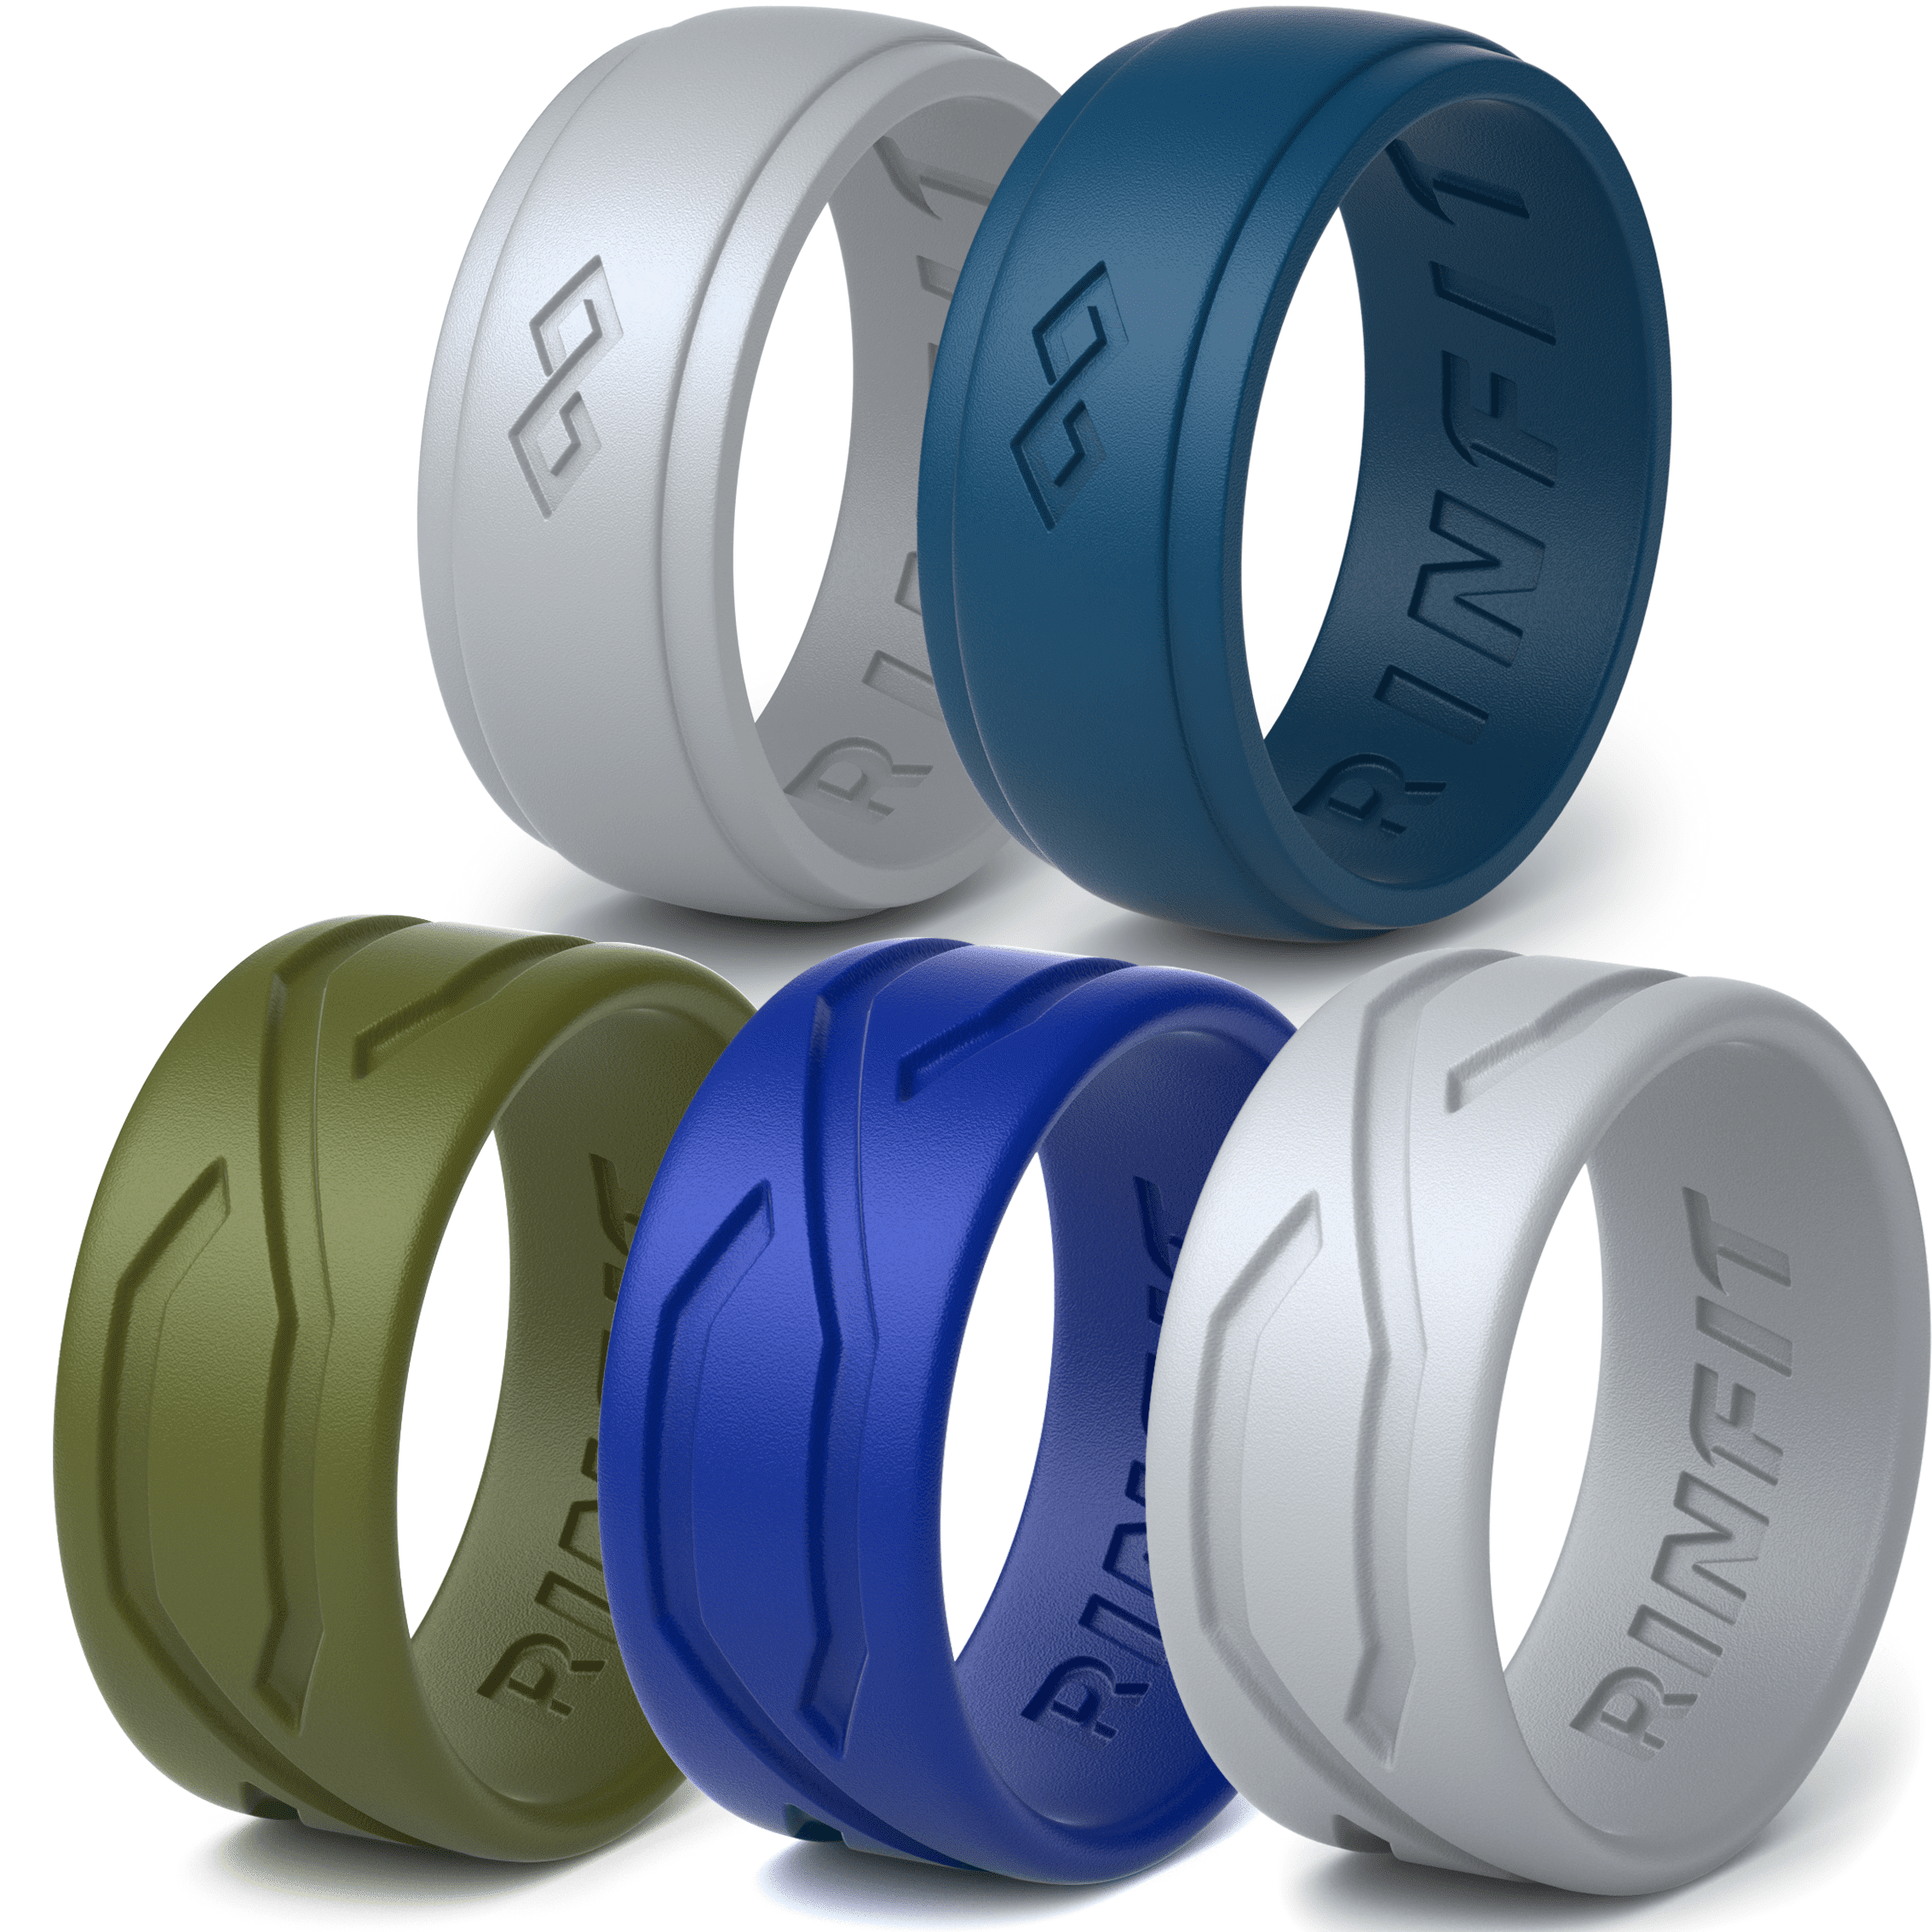 Silicone Wedding Rings / Wedding Band for Men by Rinfit. 5 Rubber Rings